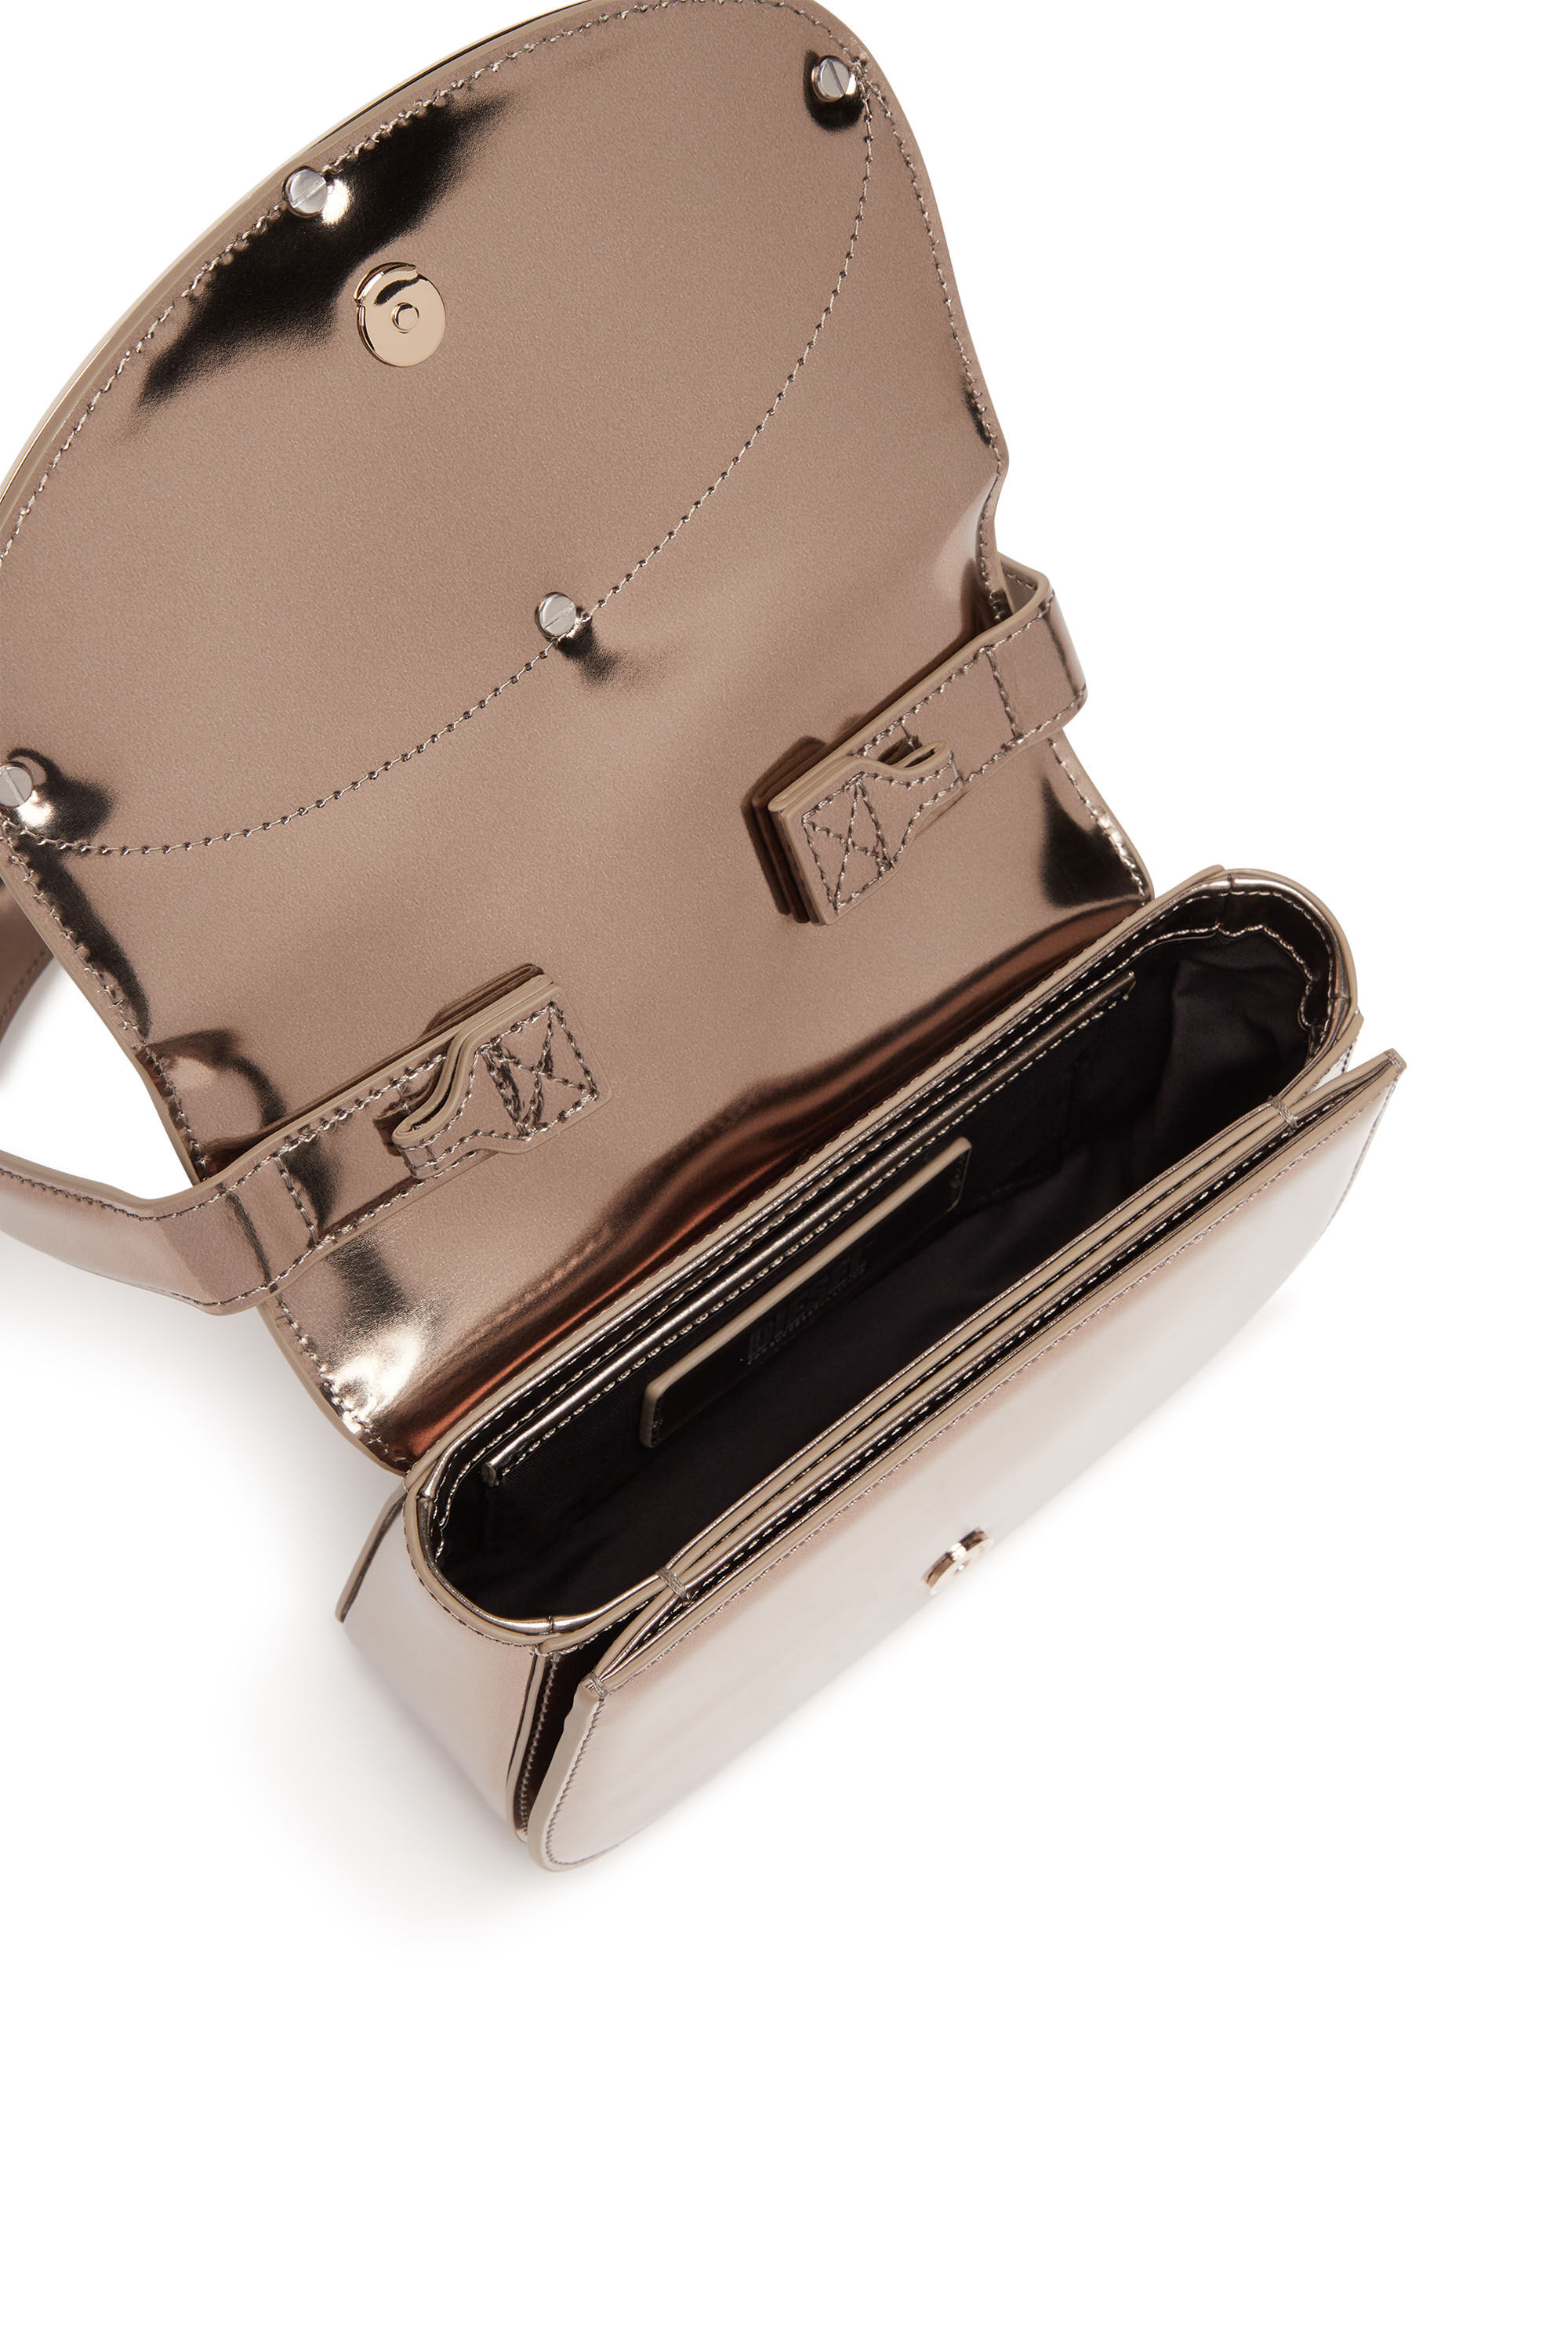 Diesel - 1DR, Woman 1DR-Iconic shoulder bag in mirrored leather in Brown - Image 5